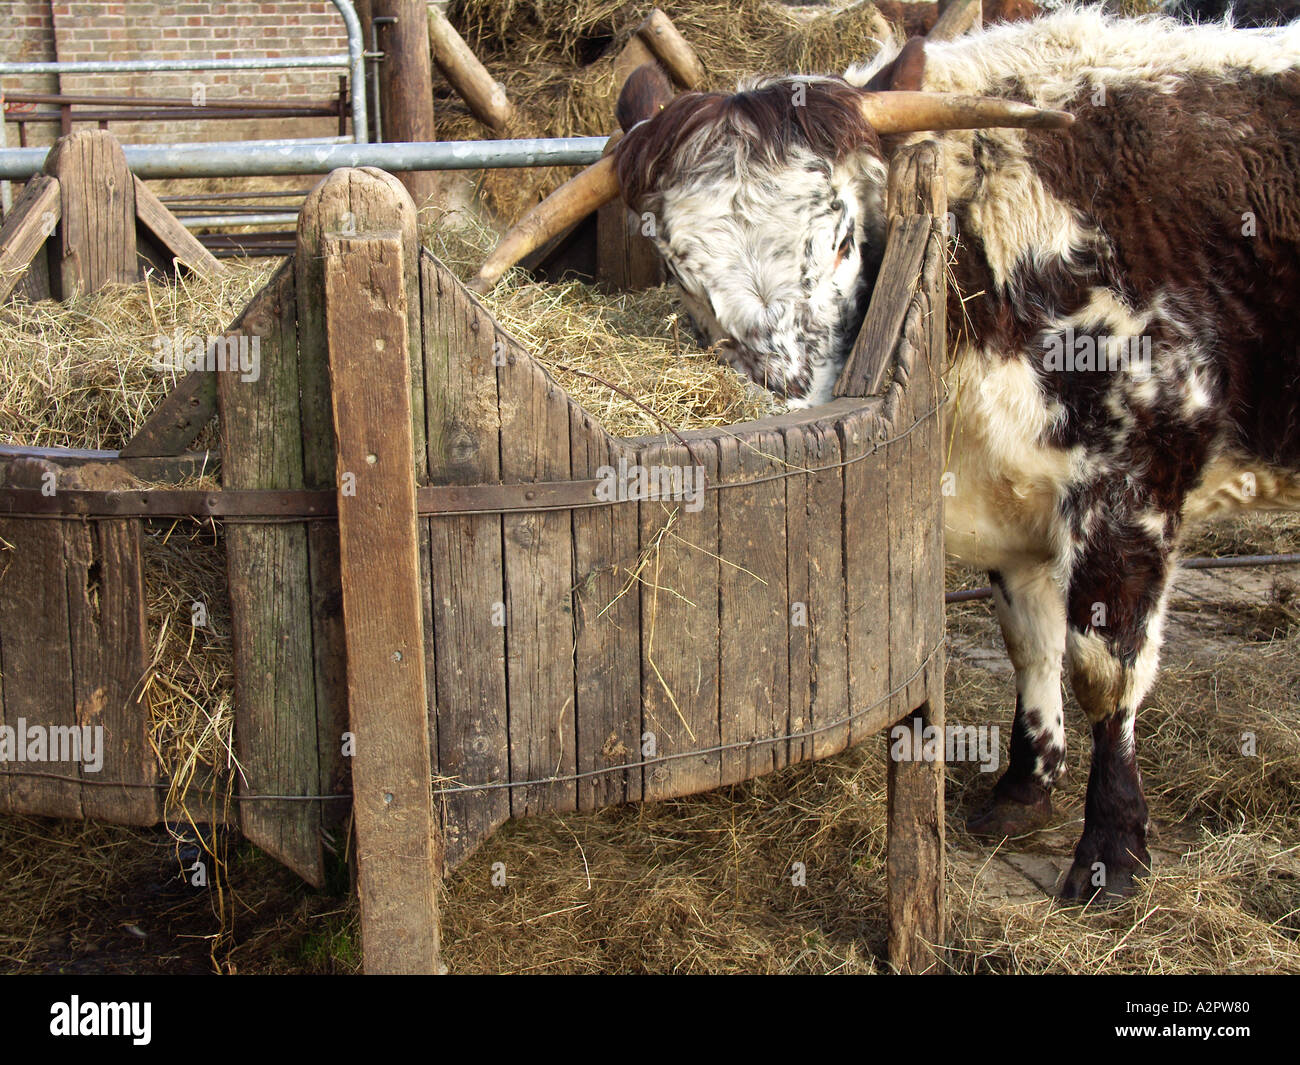 Long horn cattle and hay byre Stock Photo